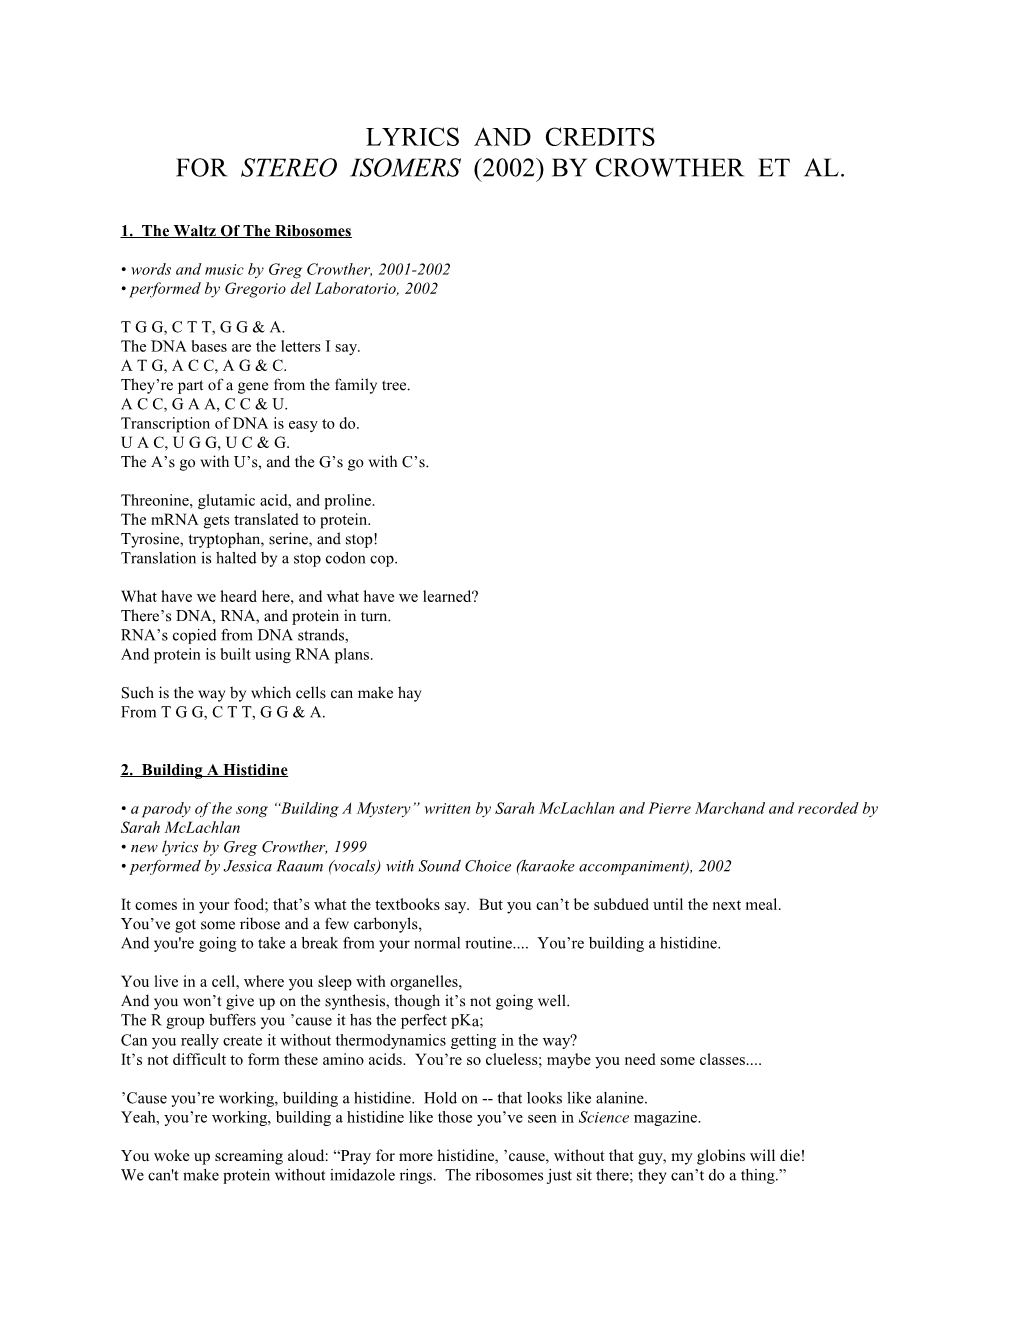 Lyrics and Credits for the Album Stereo Isomers (2002) by Crowther Et Al